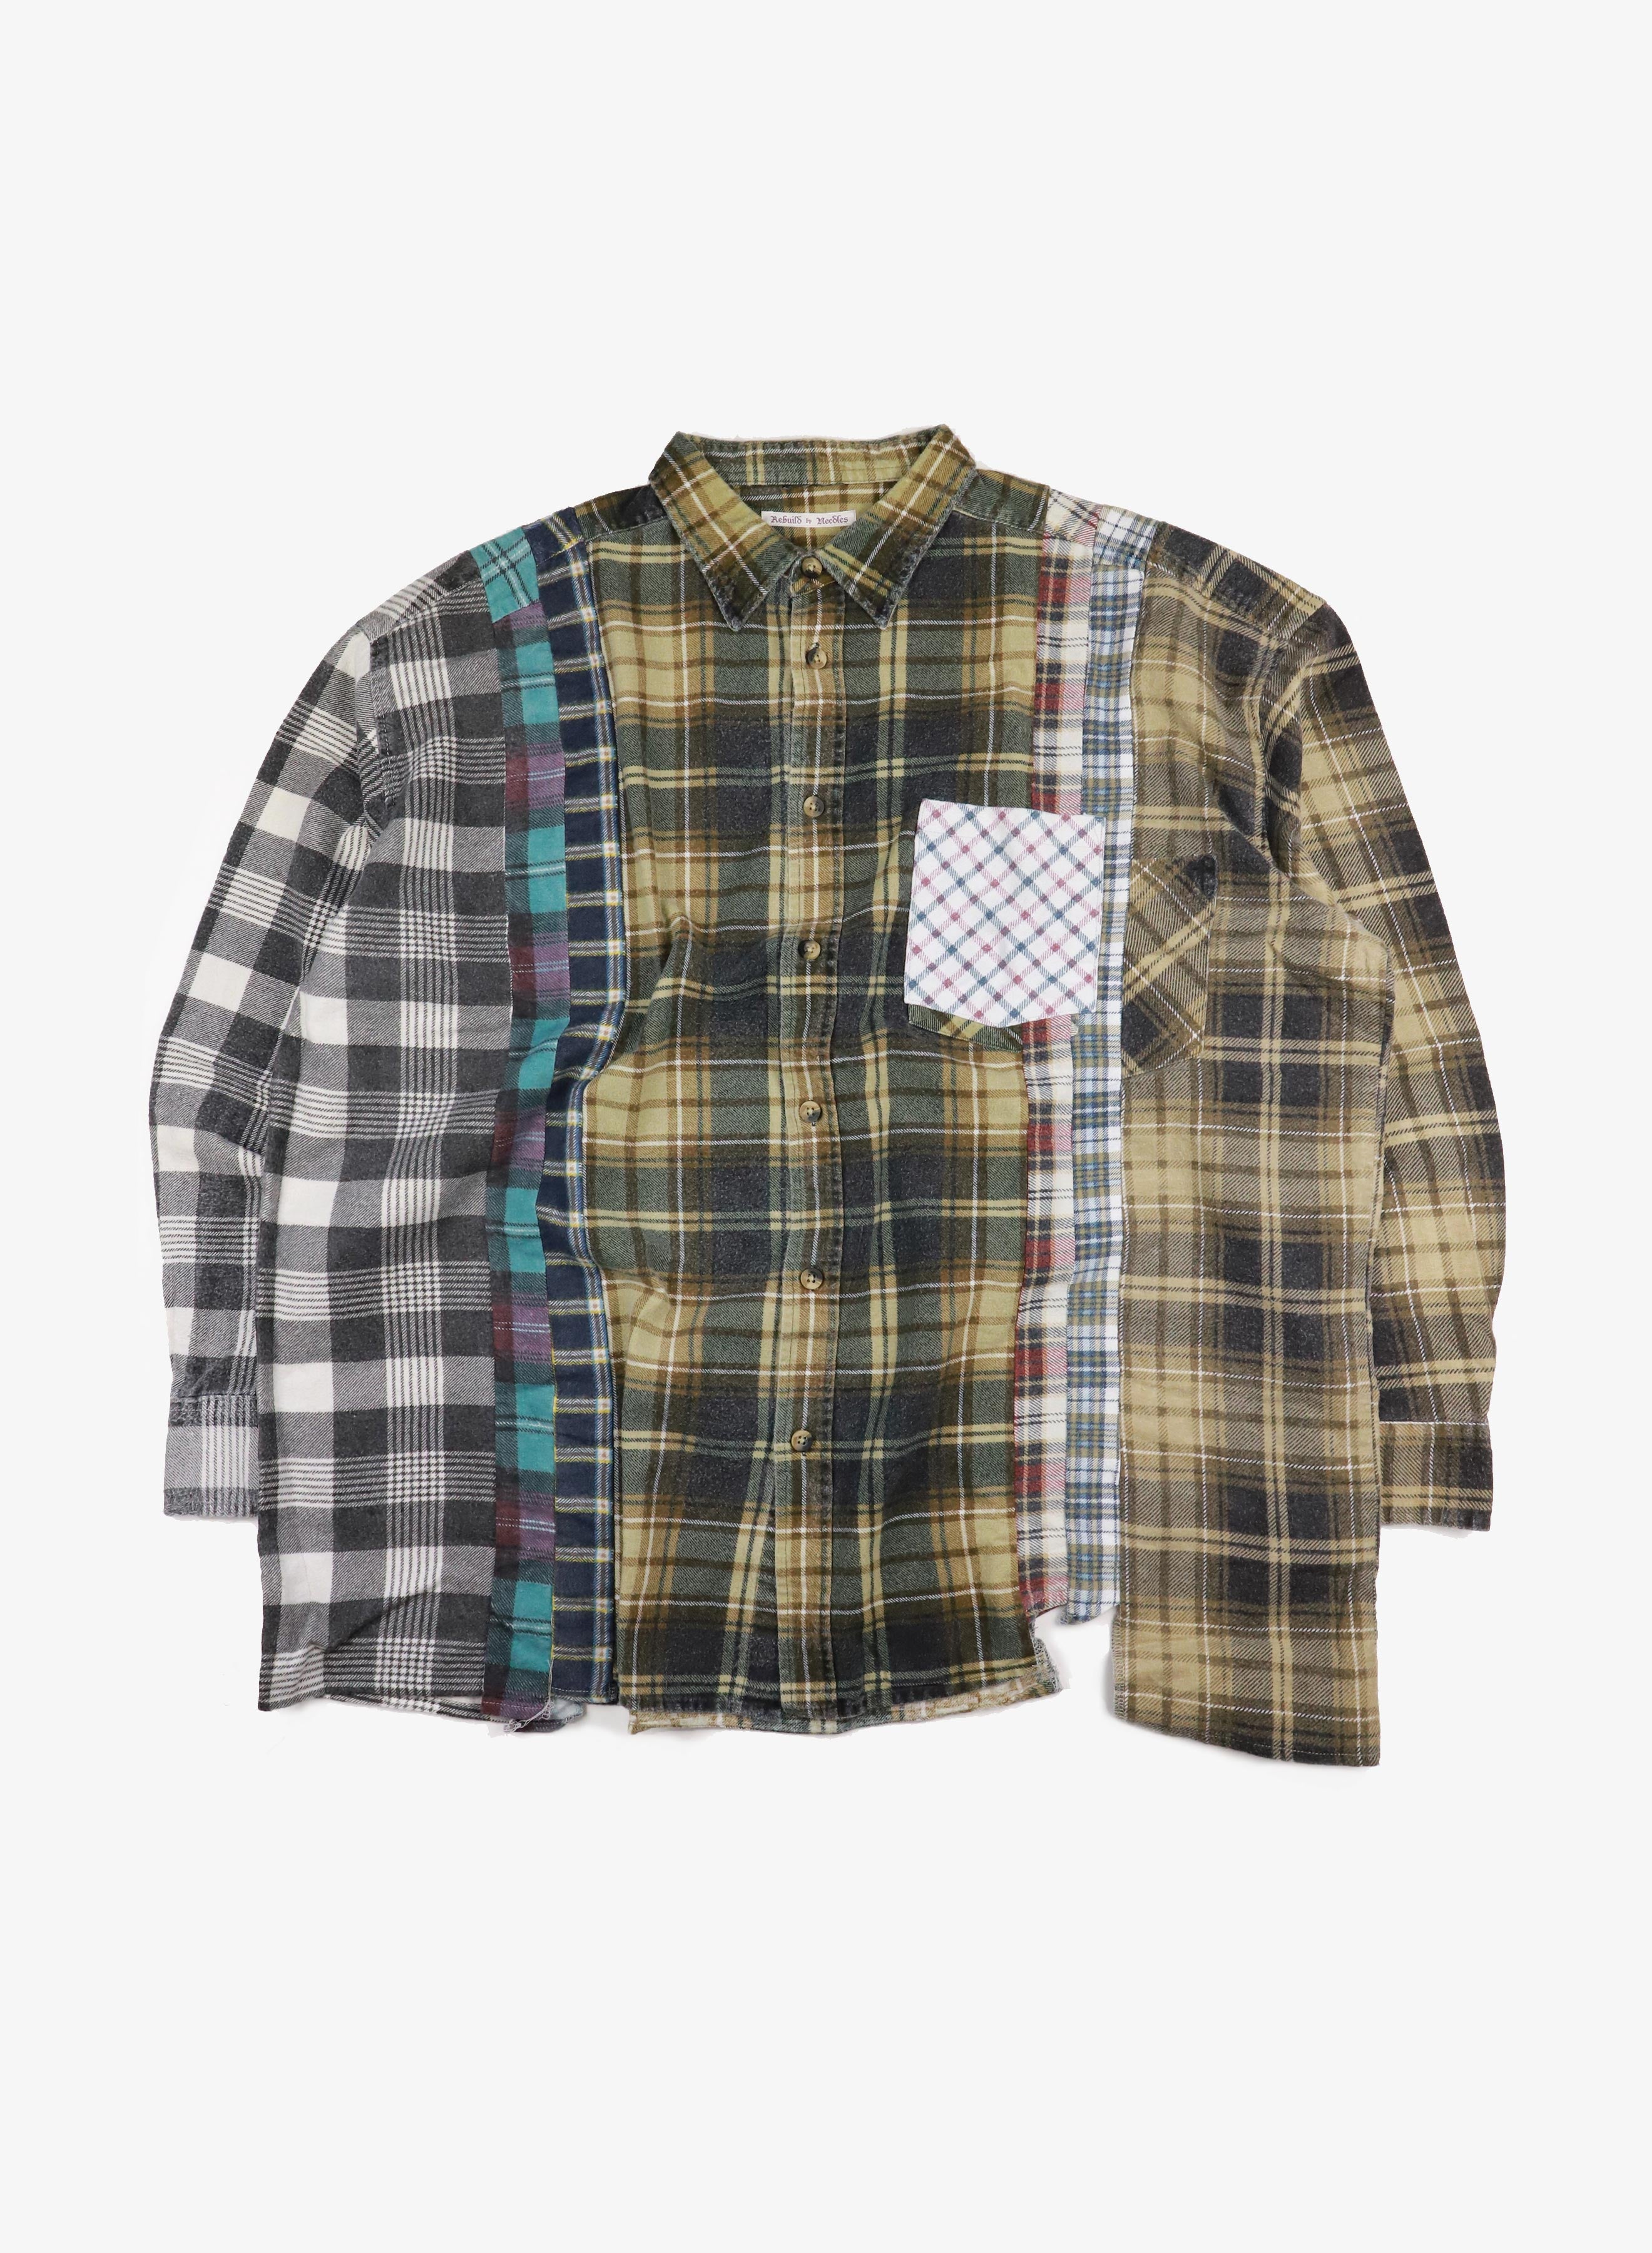 Rebuild by Needles Flannel Shirt - 7 Cuts Wide Shirt